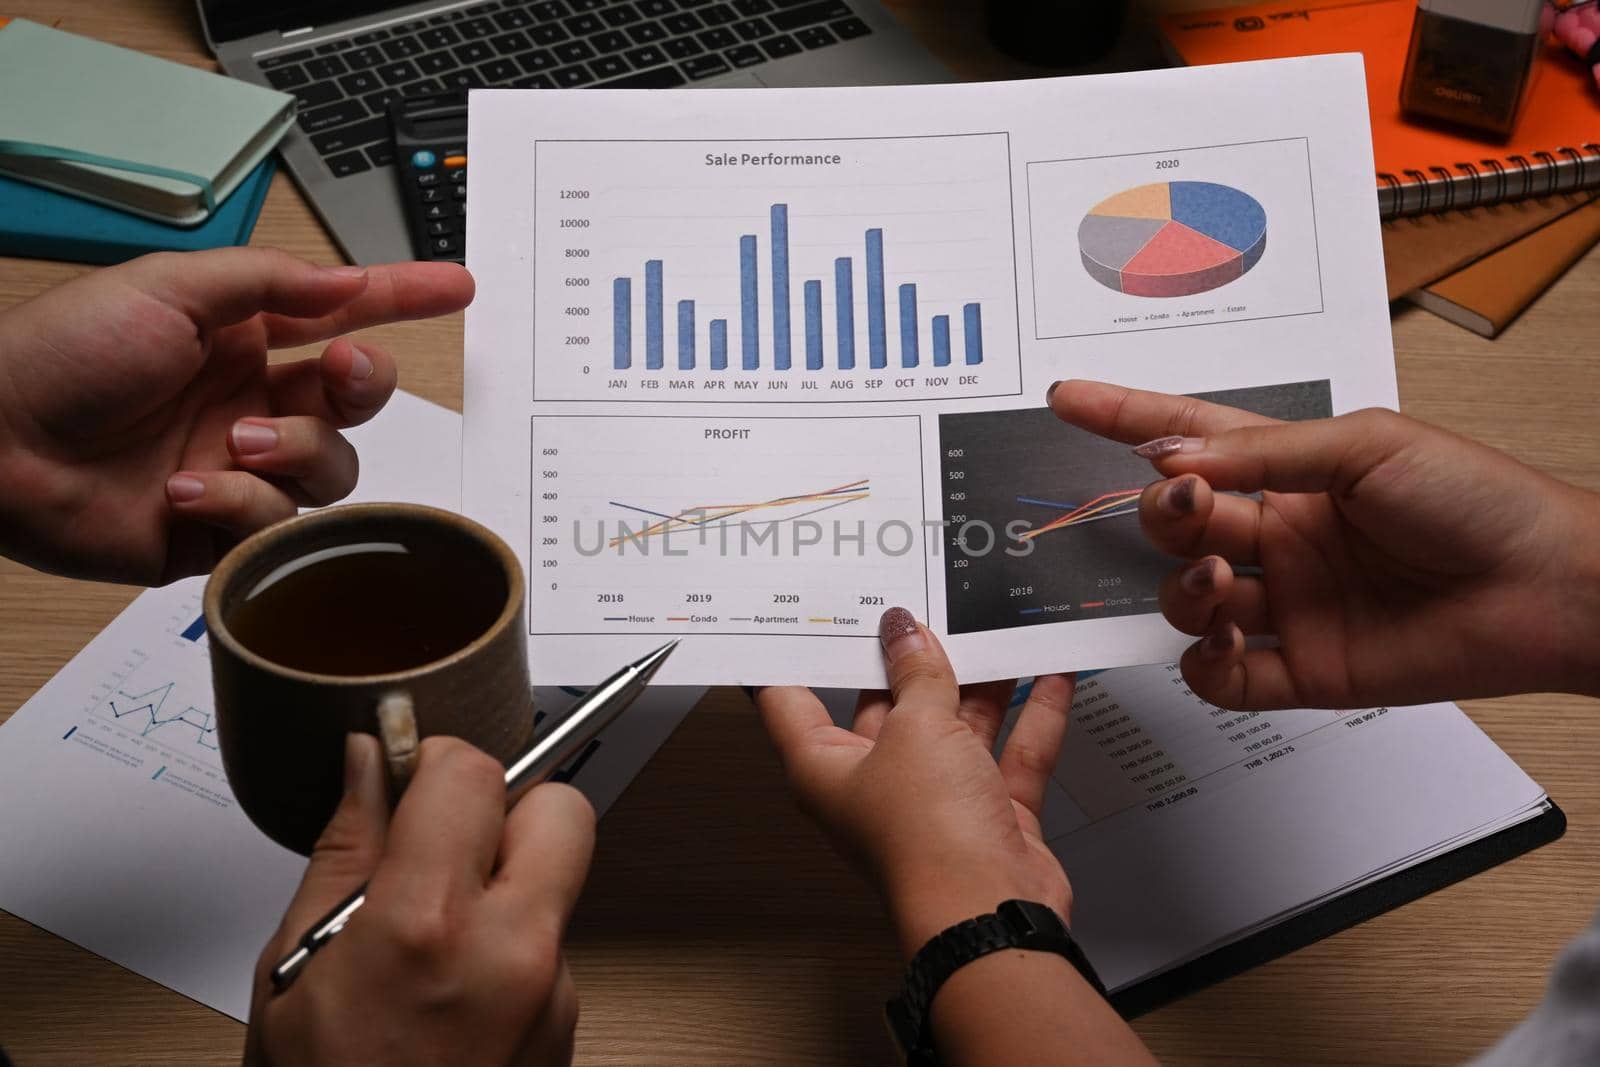 Close up image of businesspeople analyzing financial graph together.